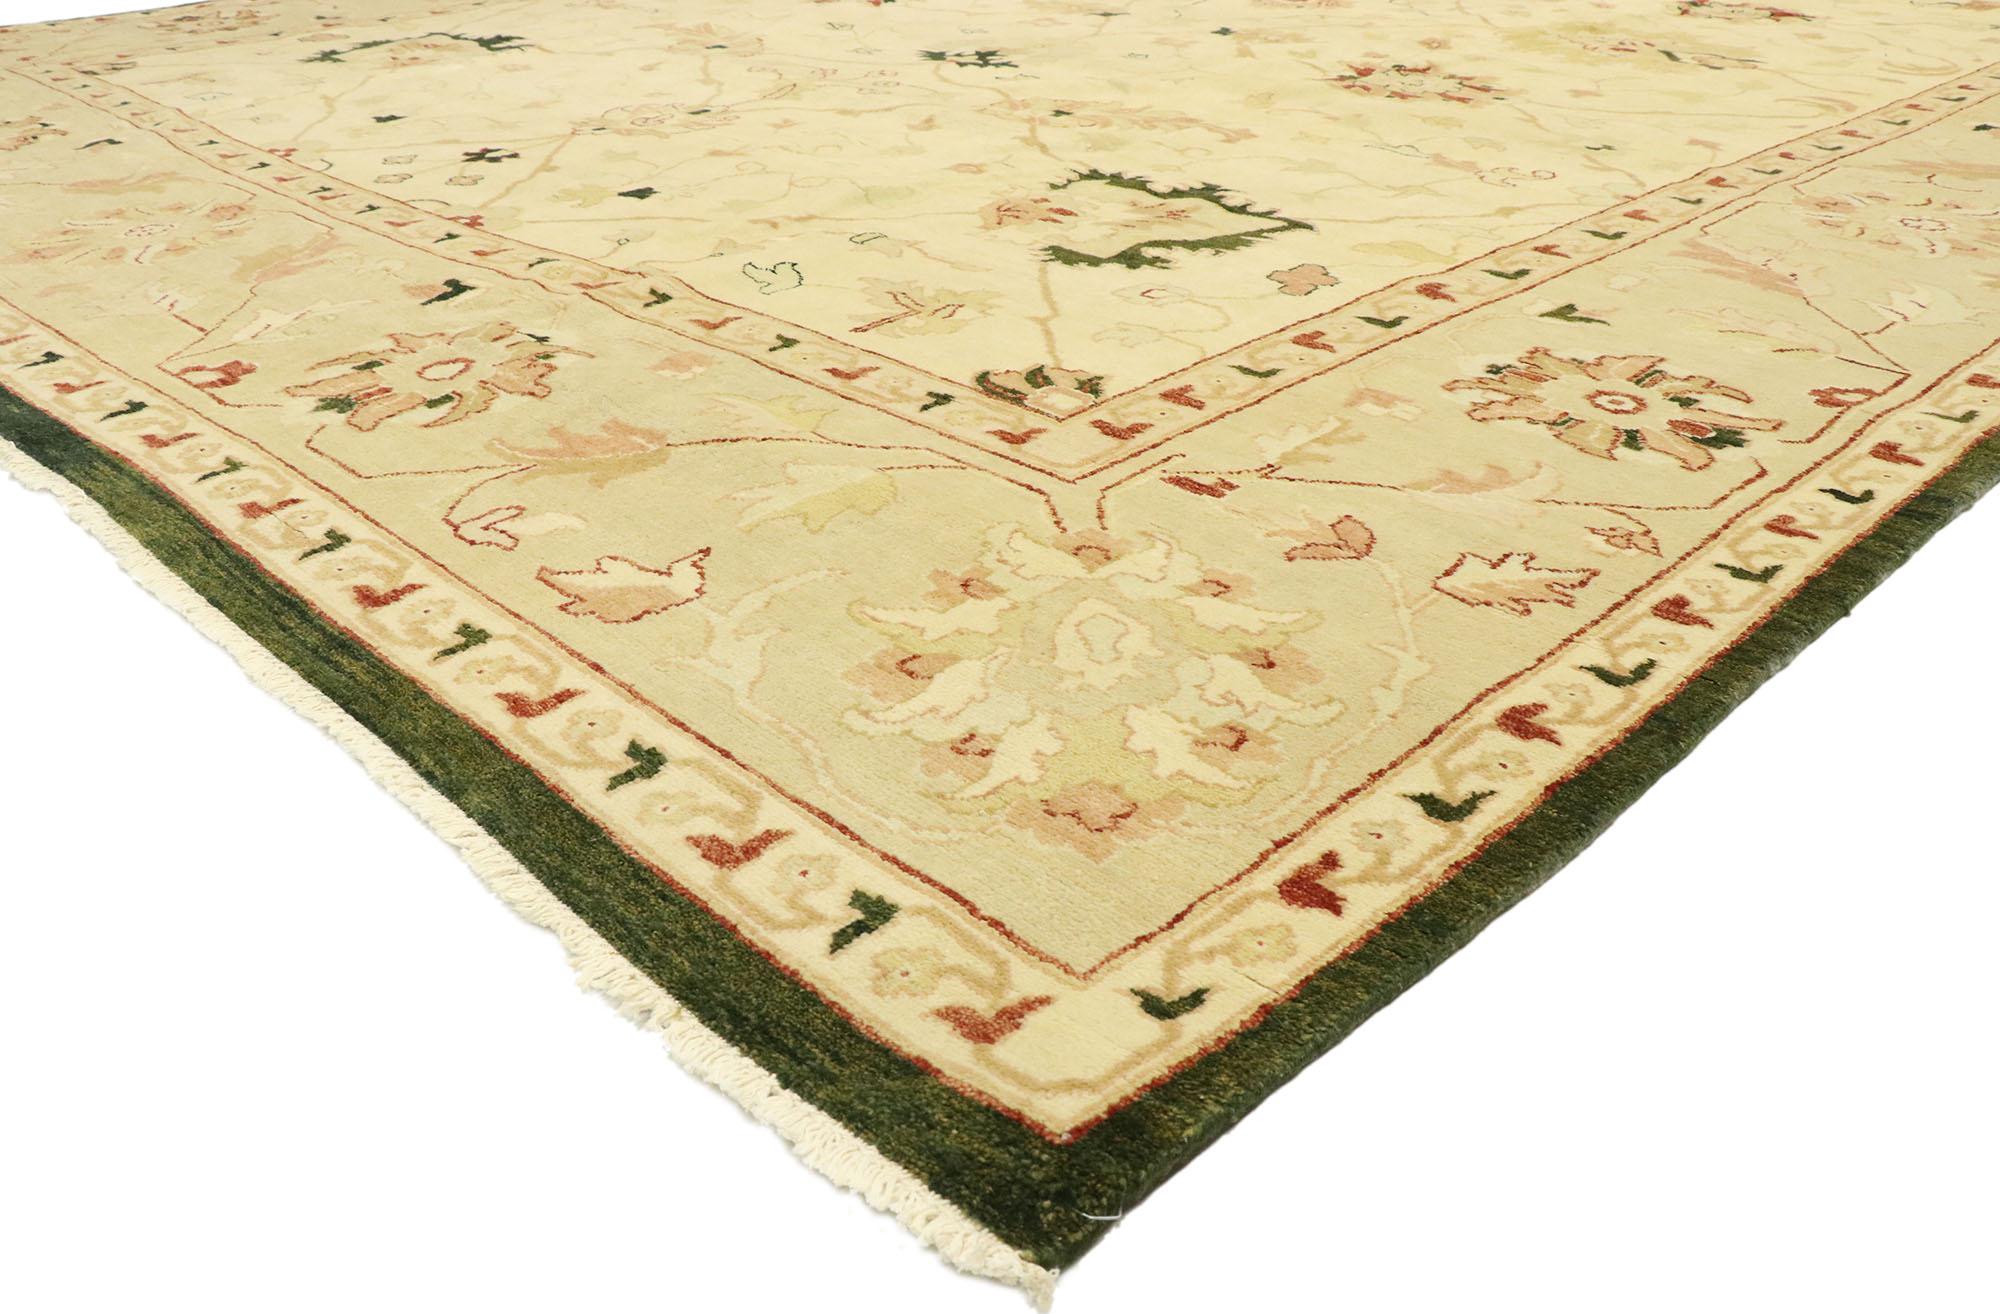 30307, new contemporary Persian Mahal Indian rug with modern transitional Arts & Crafts style. The architectural elements of naturalistic forms combined with Arts & Crafts style, this hand knotted wool vintage Persian Mahal Indian rug draws